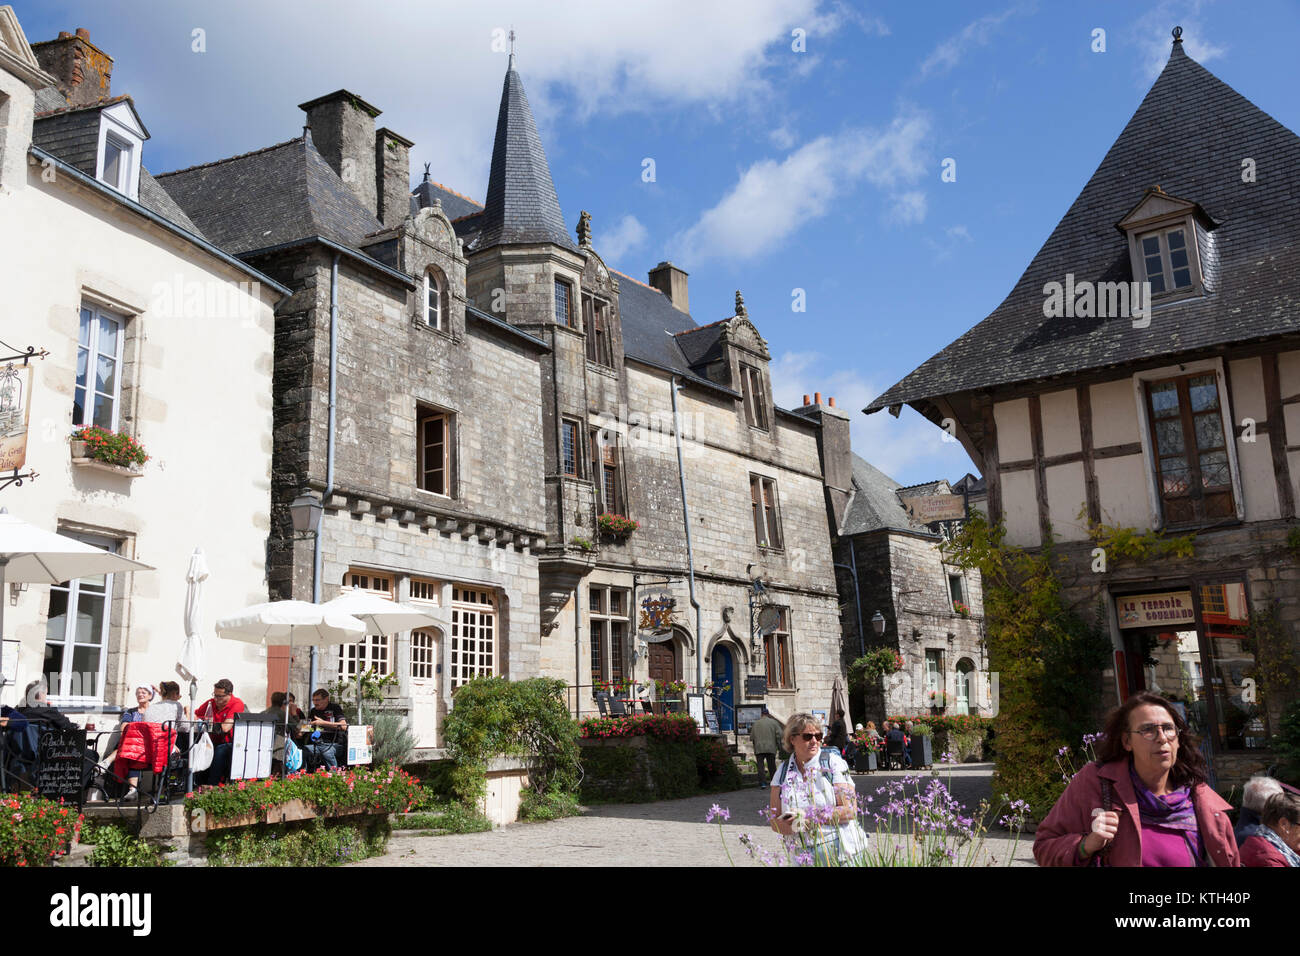 The square of the well, in Rochefort en Terre (Brittany - France). Ranked as the 2016 France's most beautiful village. Stock Photo